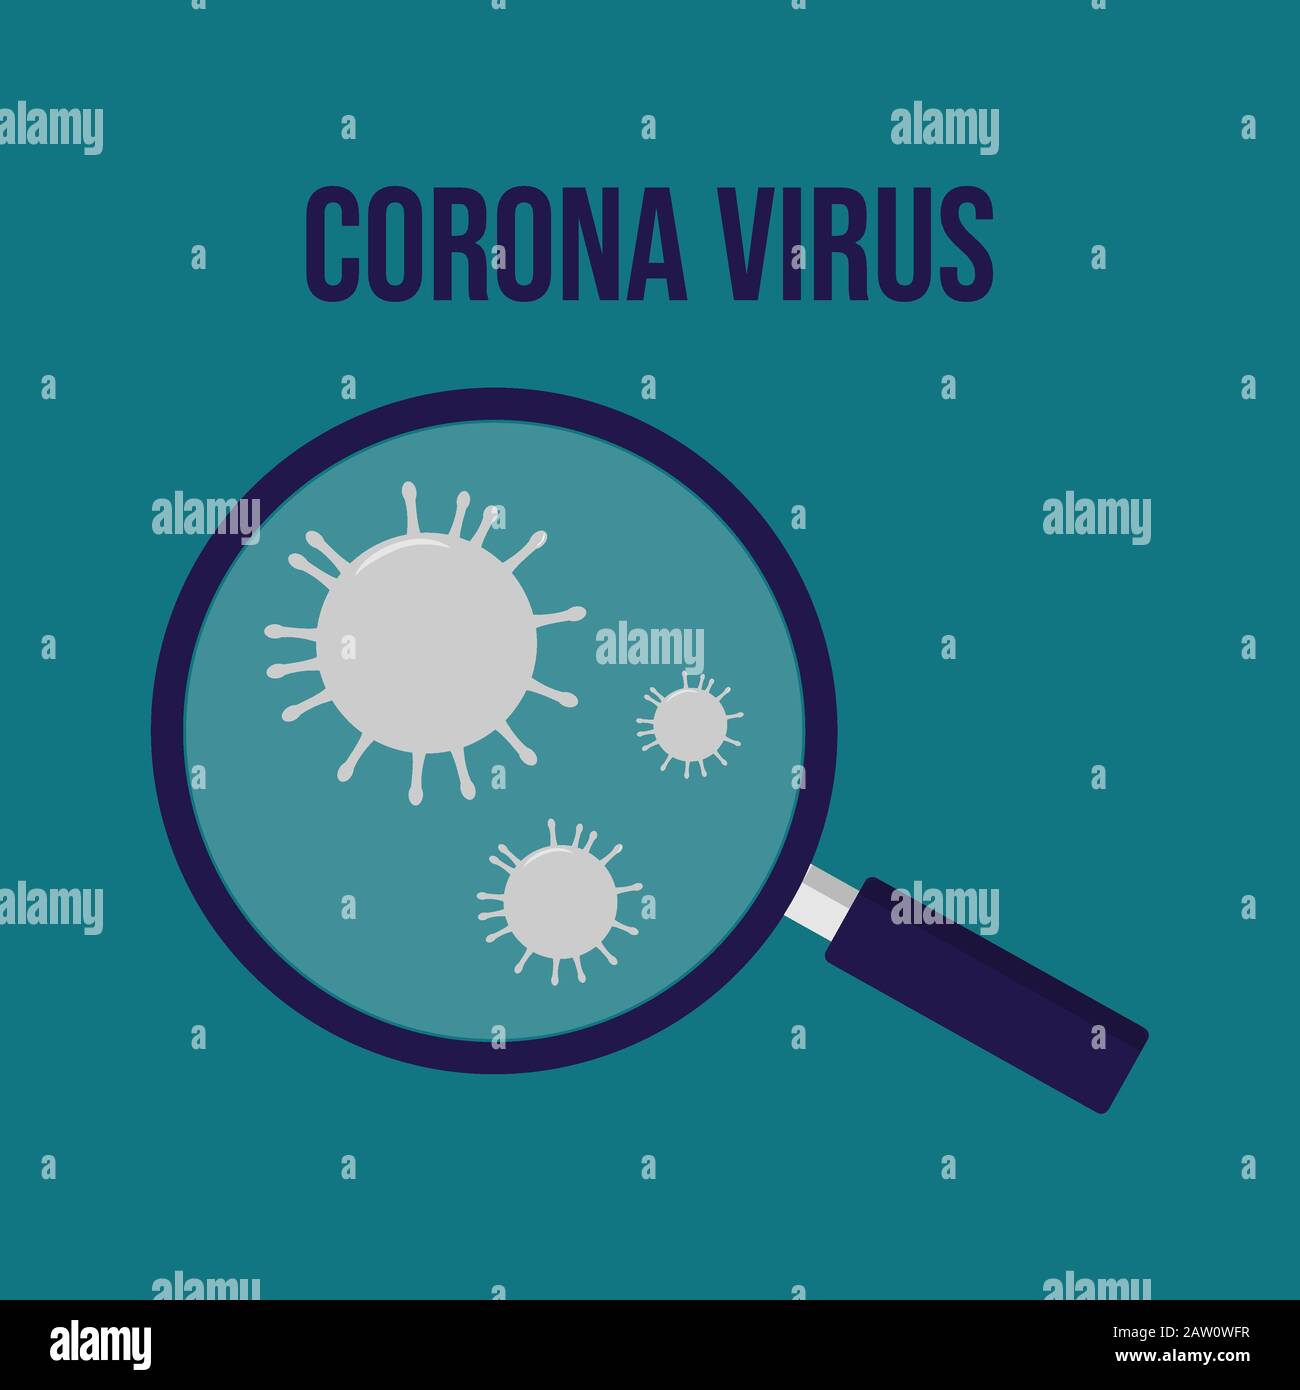 Corona virus icon with loop icon. blue background. isolated. template for brochure and social media post. Stock Photo